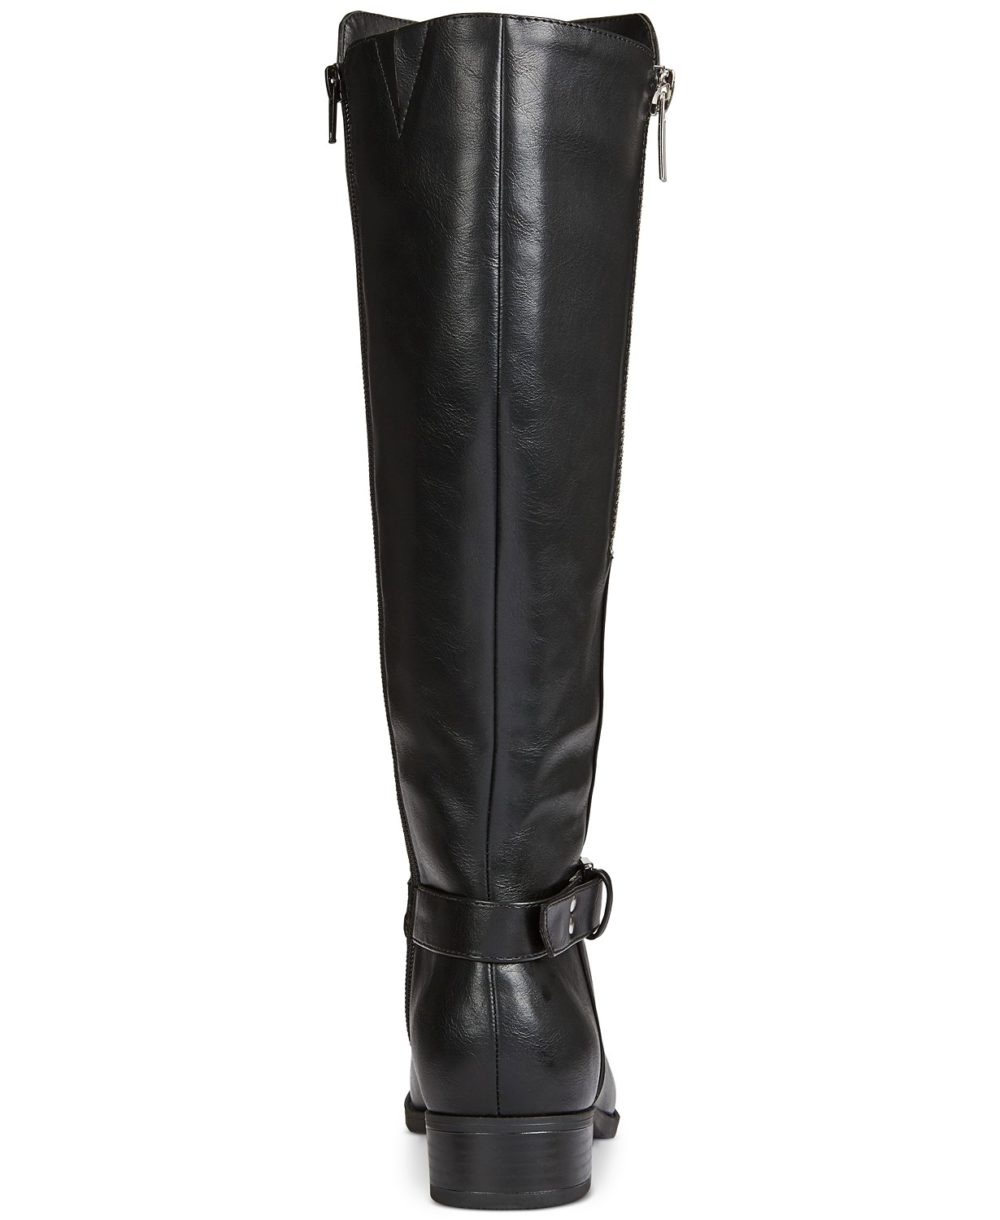 woocommerce-673321-2209615.cloudwaysapps.com-material-girl-womens-black-winnnie-strap-riding-boots